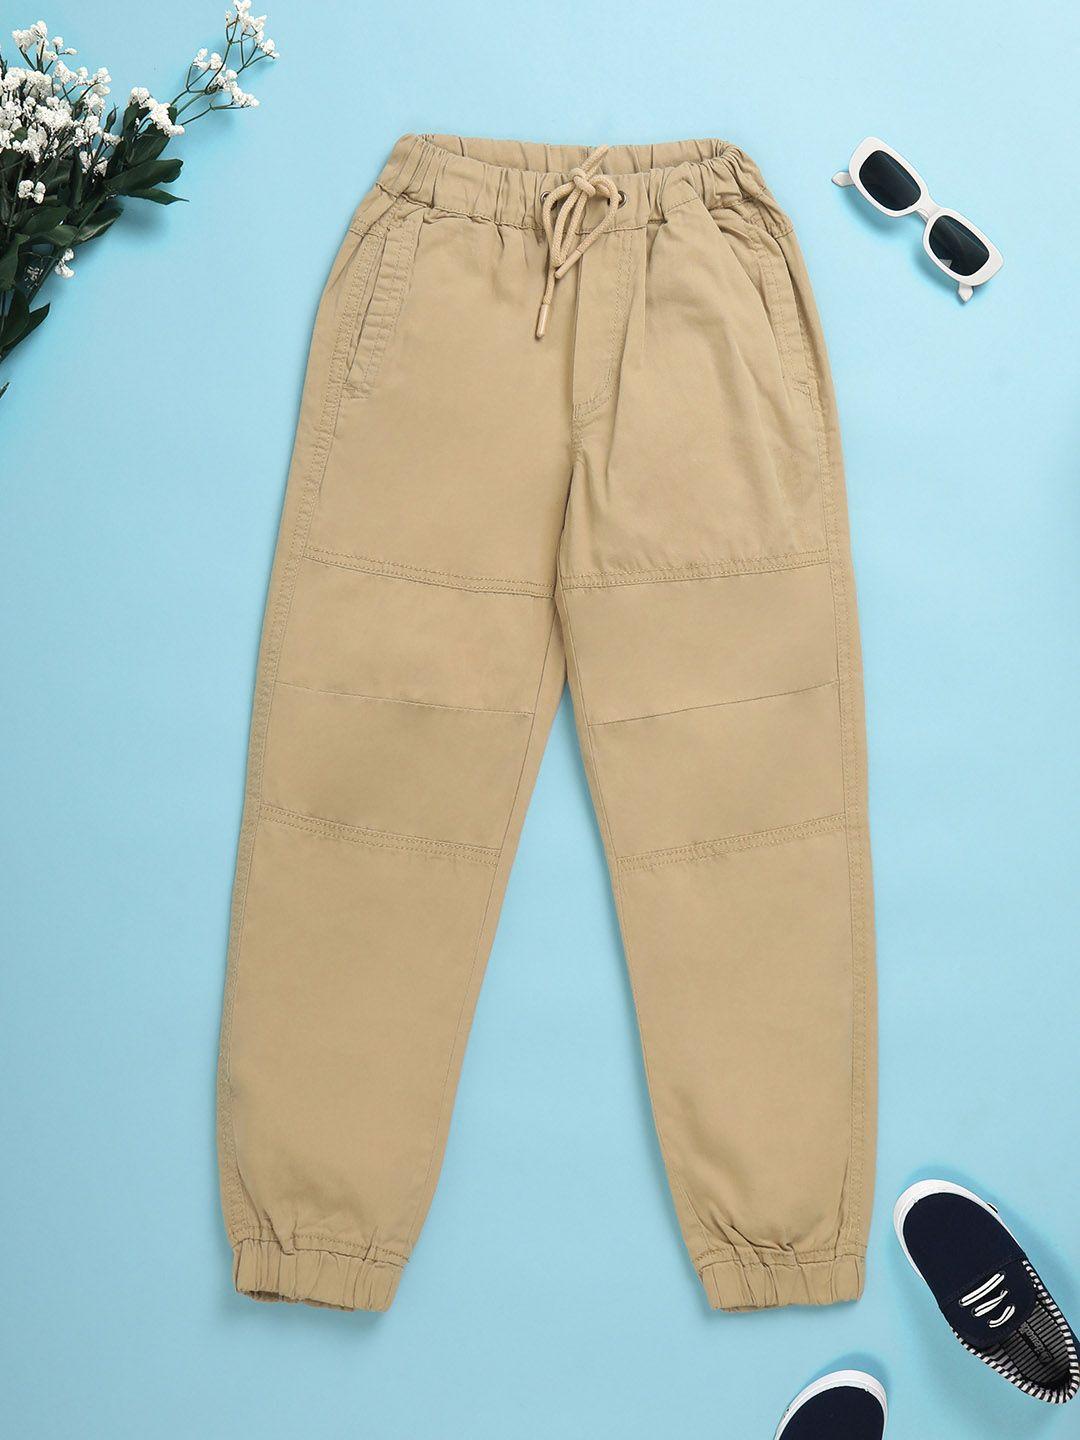 v-mart boys twill mid-rise cotton trousers